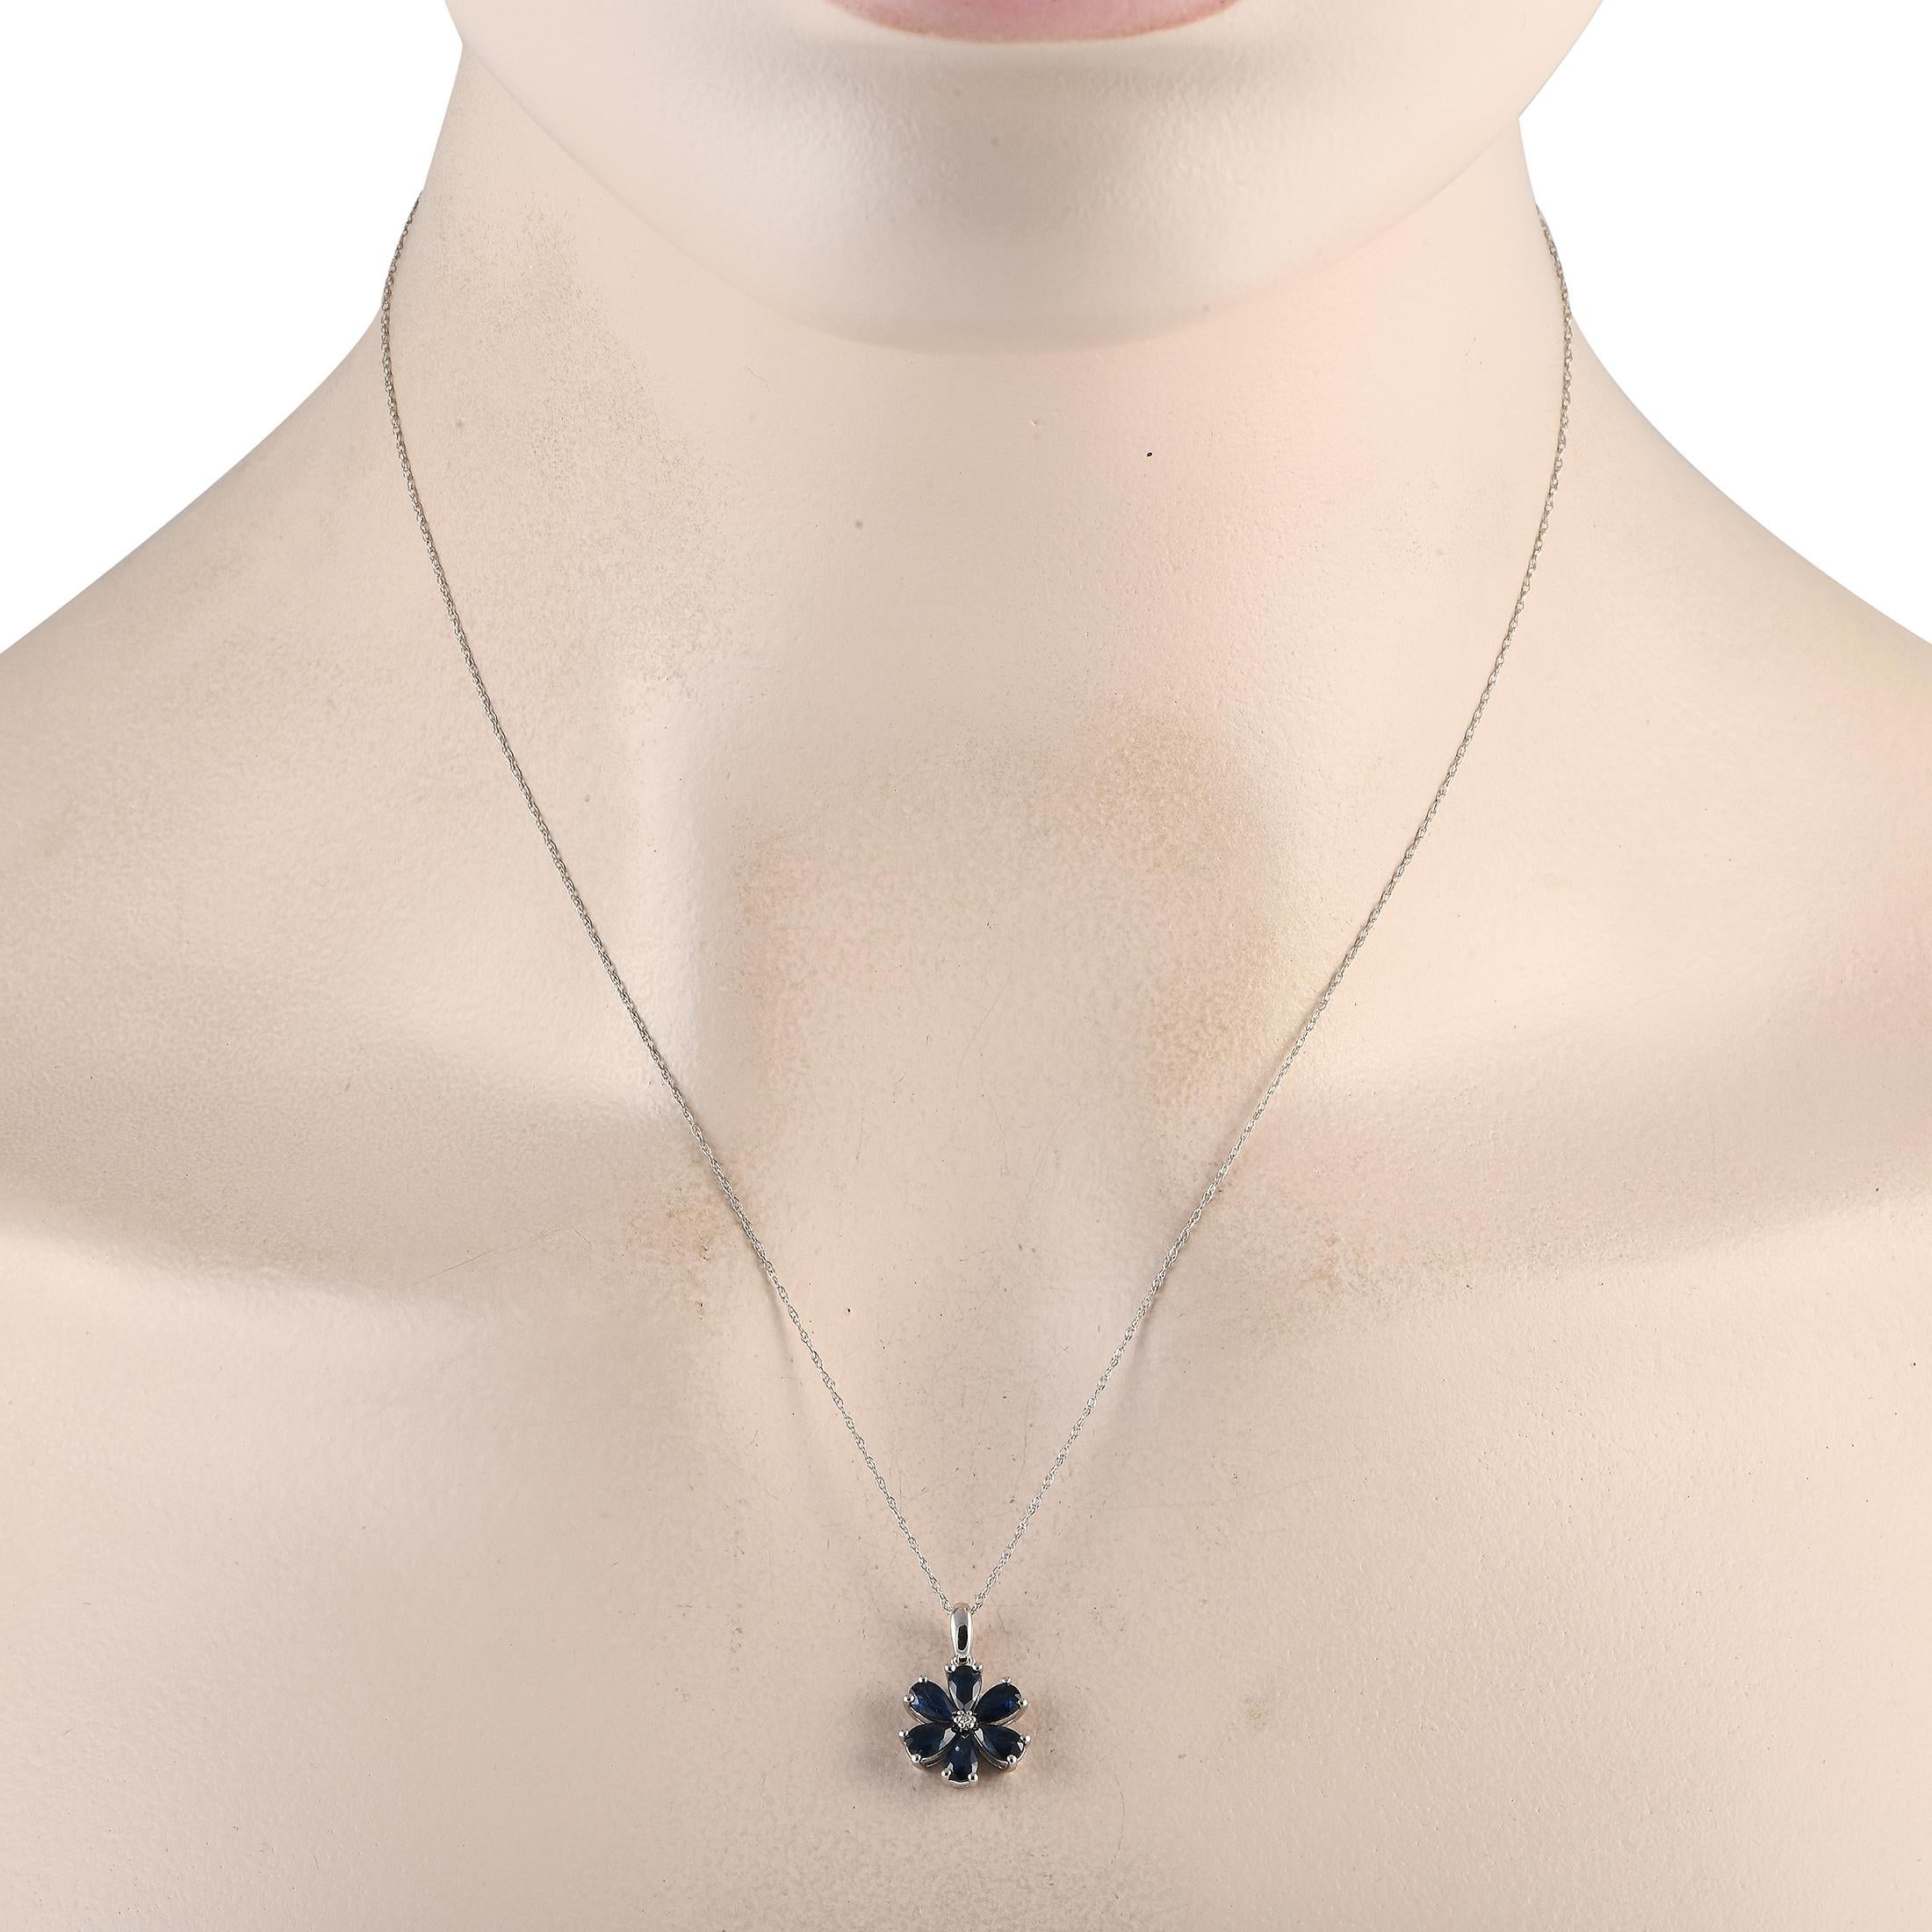 A floral pendant measuring 0.75 long by 0.50 wide makes this impeccably crafted necklace simply unforgettable. Deep blue sapphire petals elevate the 14K white gold pendant, while a singular 0.01ct diamond center stone provides the perfect finishing